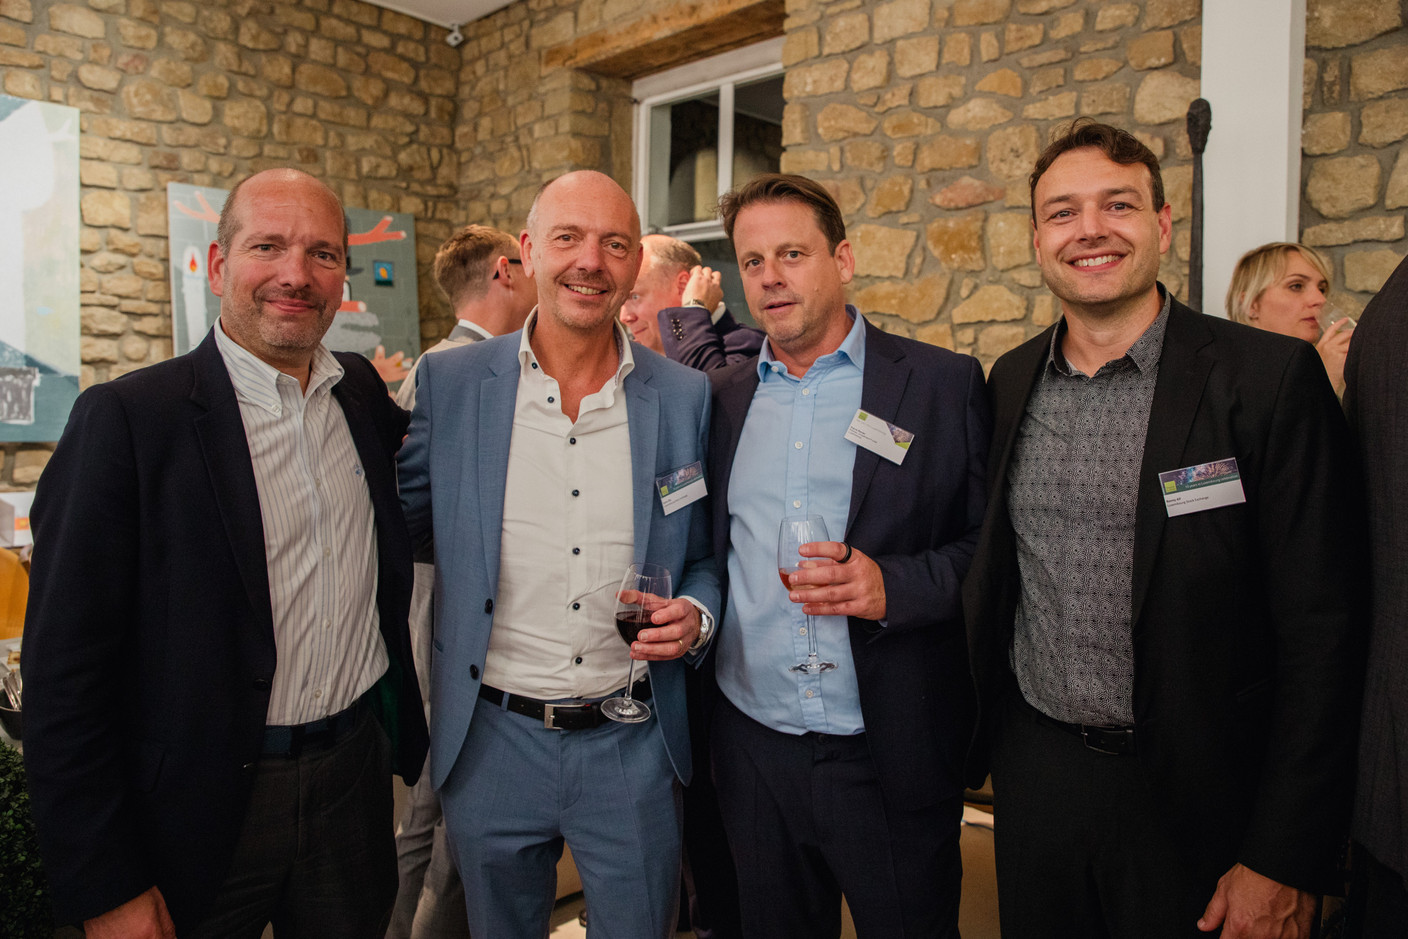 Jean-Marc Goy (Capital Group and Association of the Luxembourg Fund Industry), Carlo Oly (Luxembourg Stock Exchange), Pierre Reuter (Hogan Lovells Luxembourg) and Ronny Alf (Luxembourg Stock Exchange). Photo: Aurélie Savart